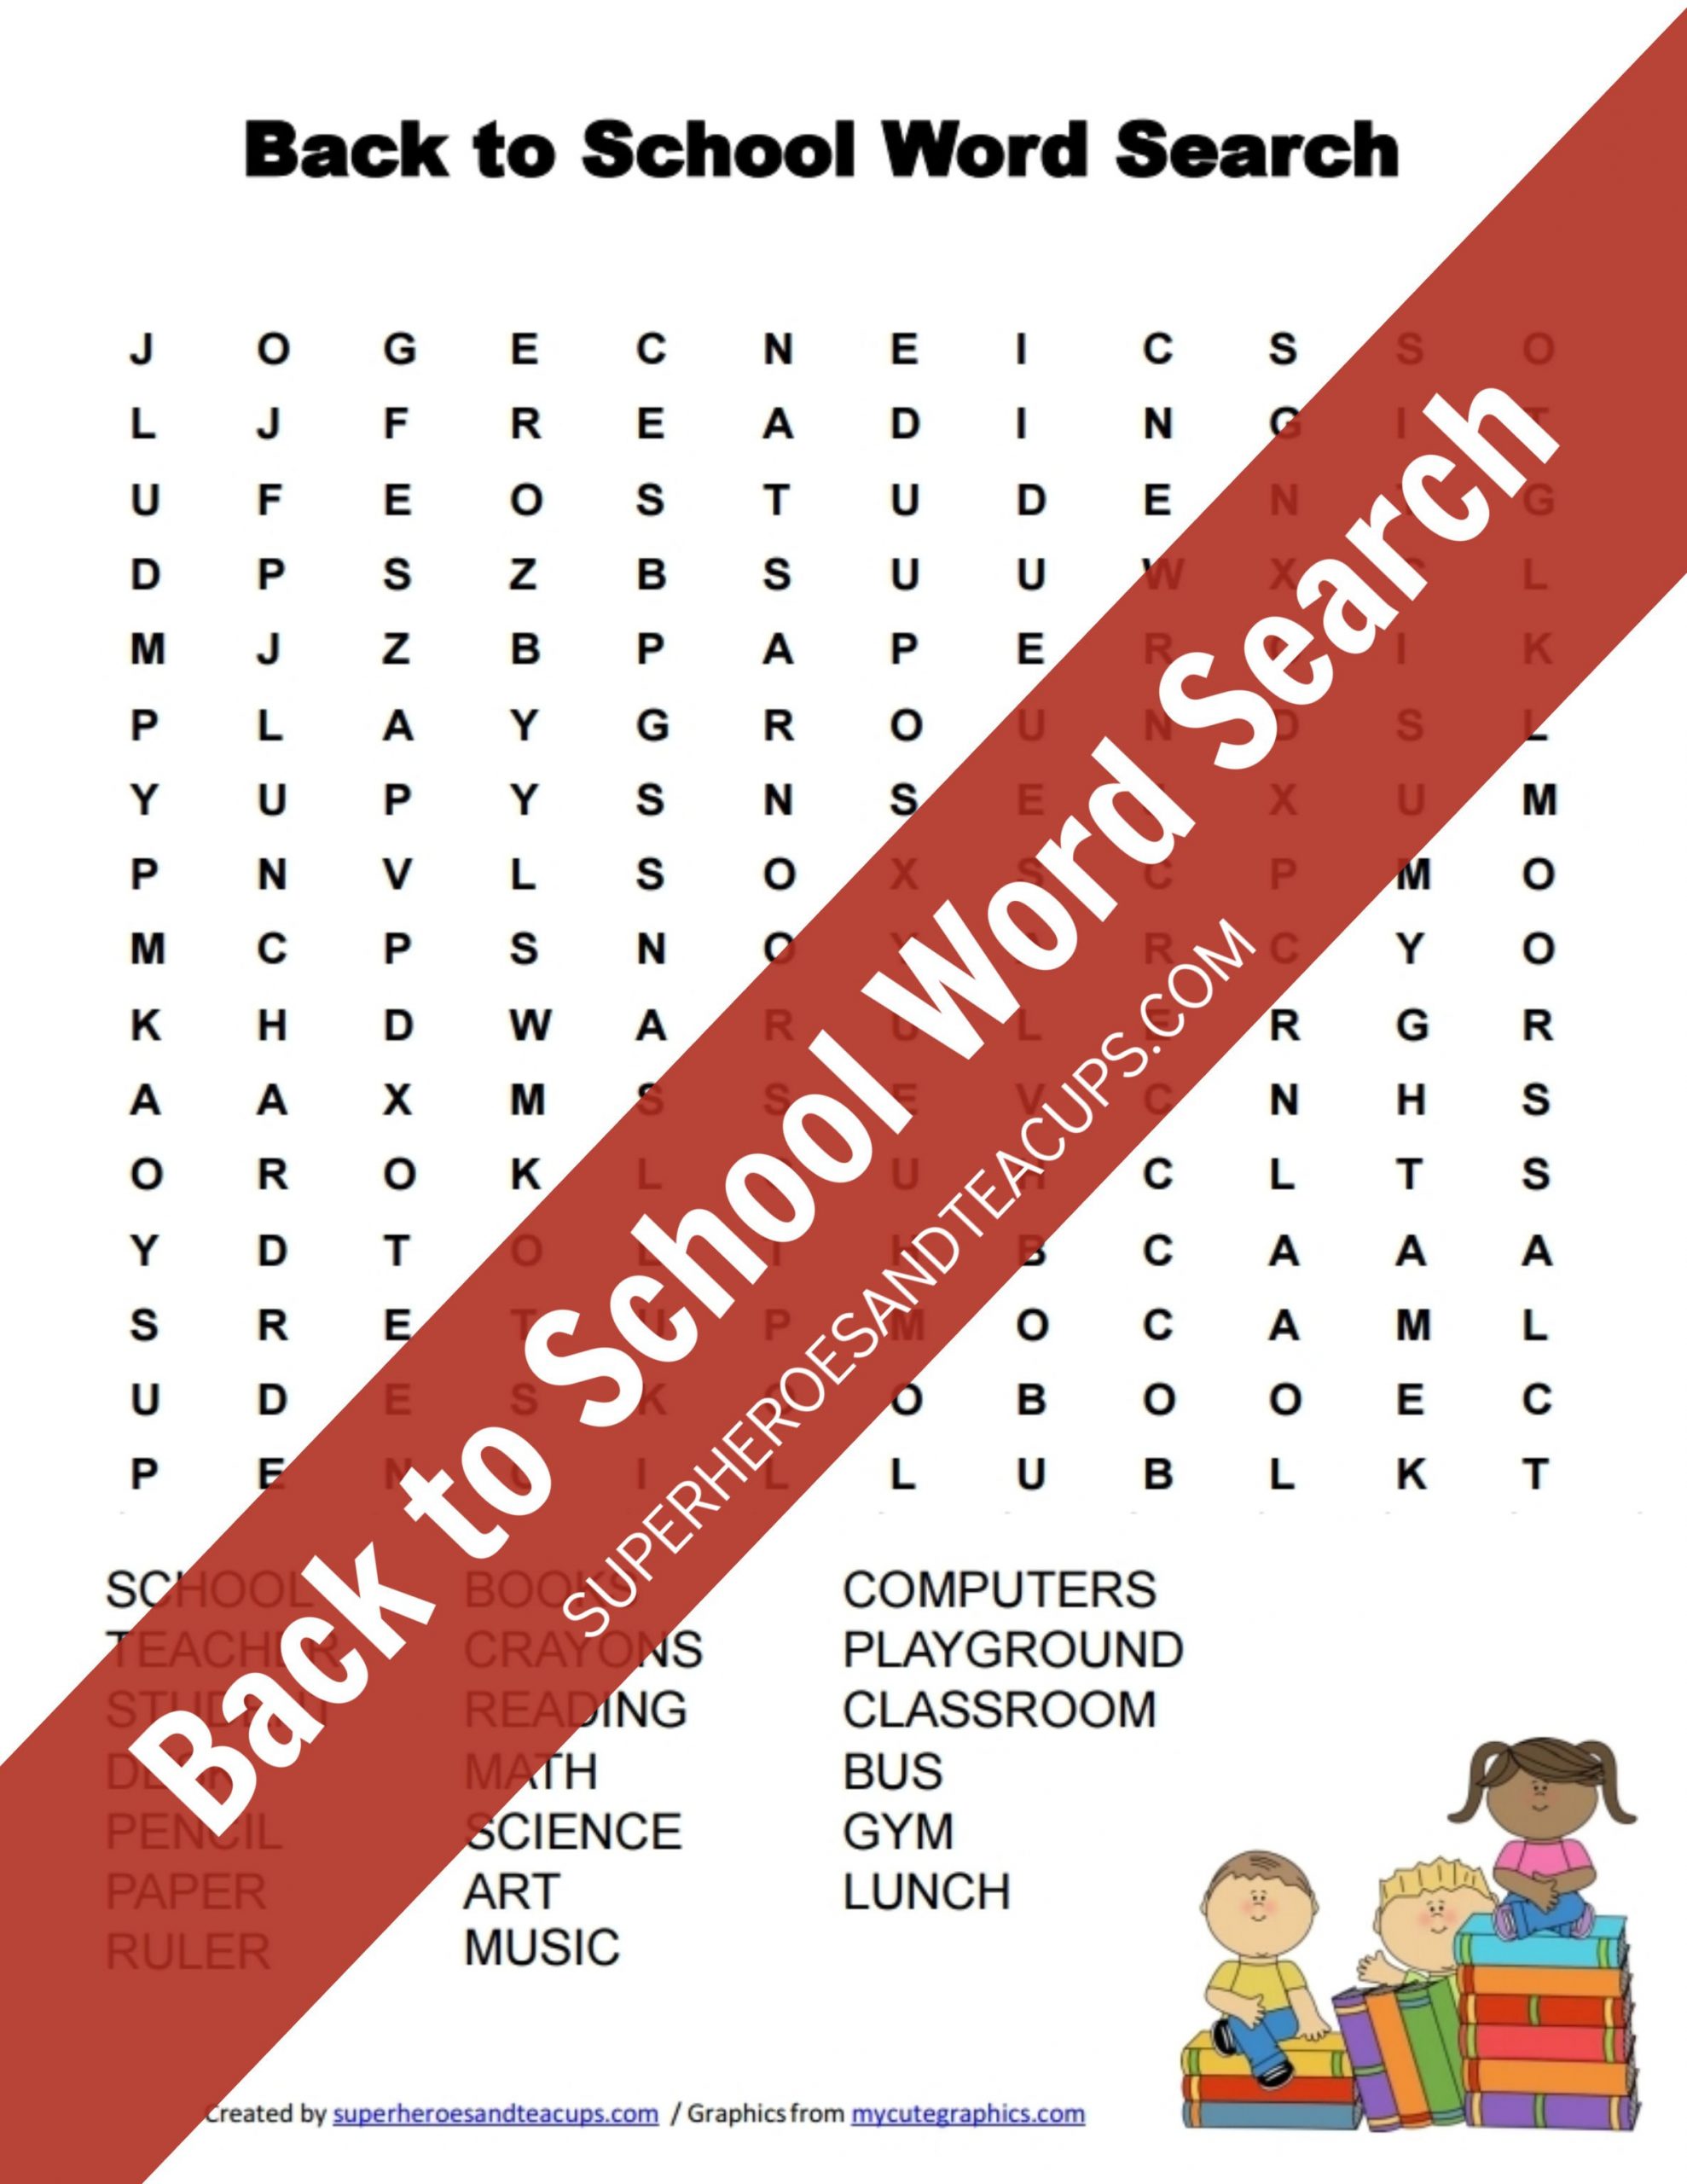 Back To School Word Search Free Printable | Superheroes And